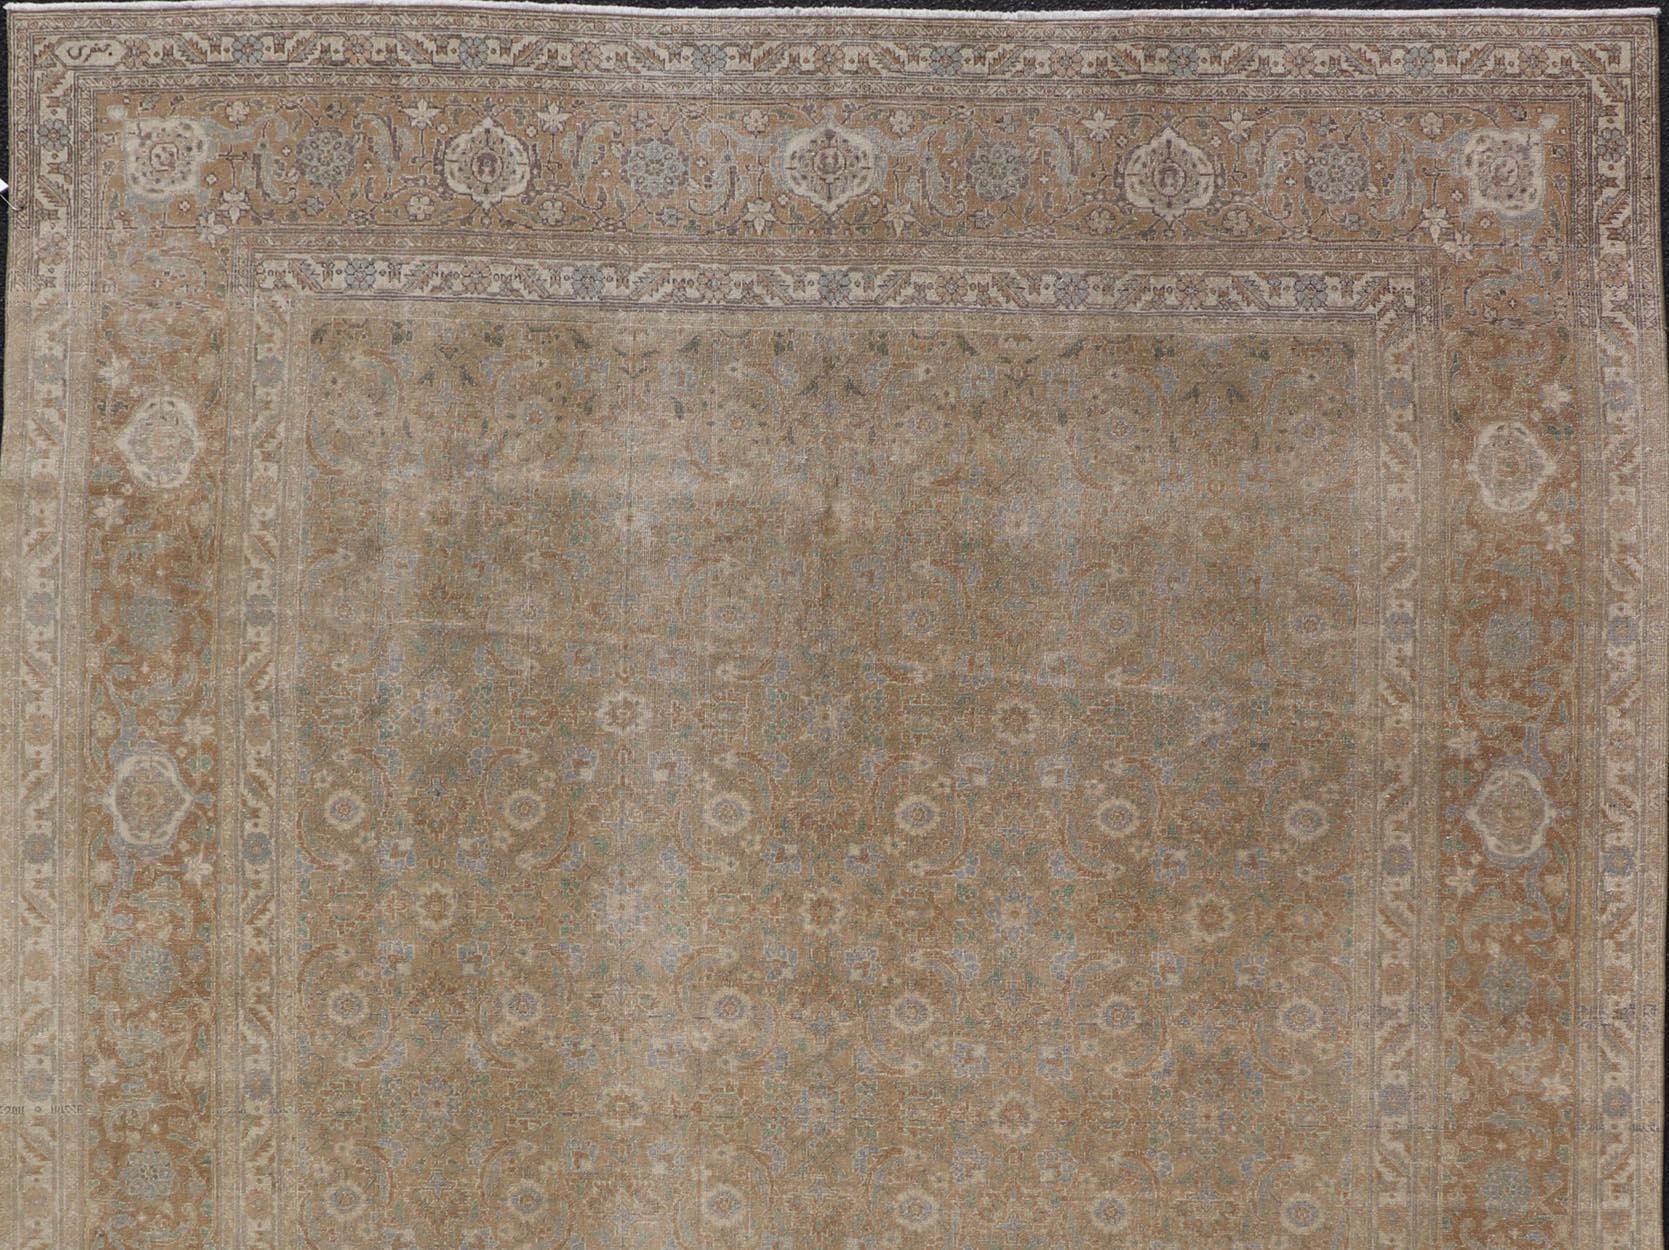 Antique Persian Tabriz Rug in Wool with All-Over Floral Design in Earth Colors For Sale 2